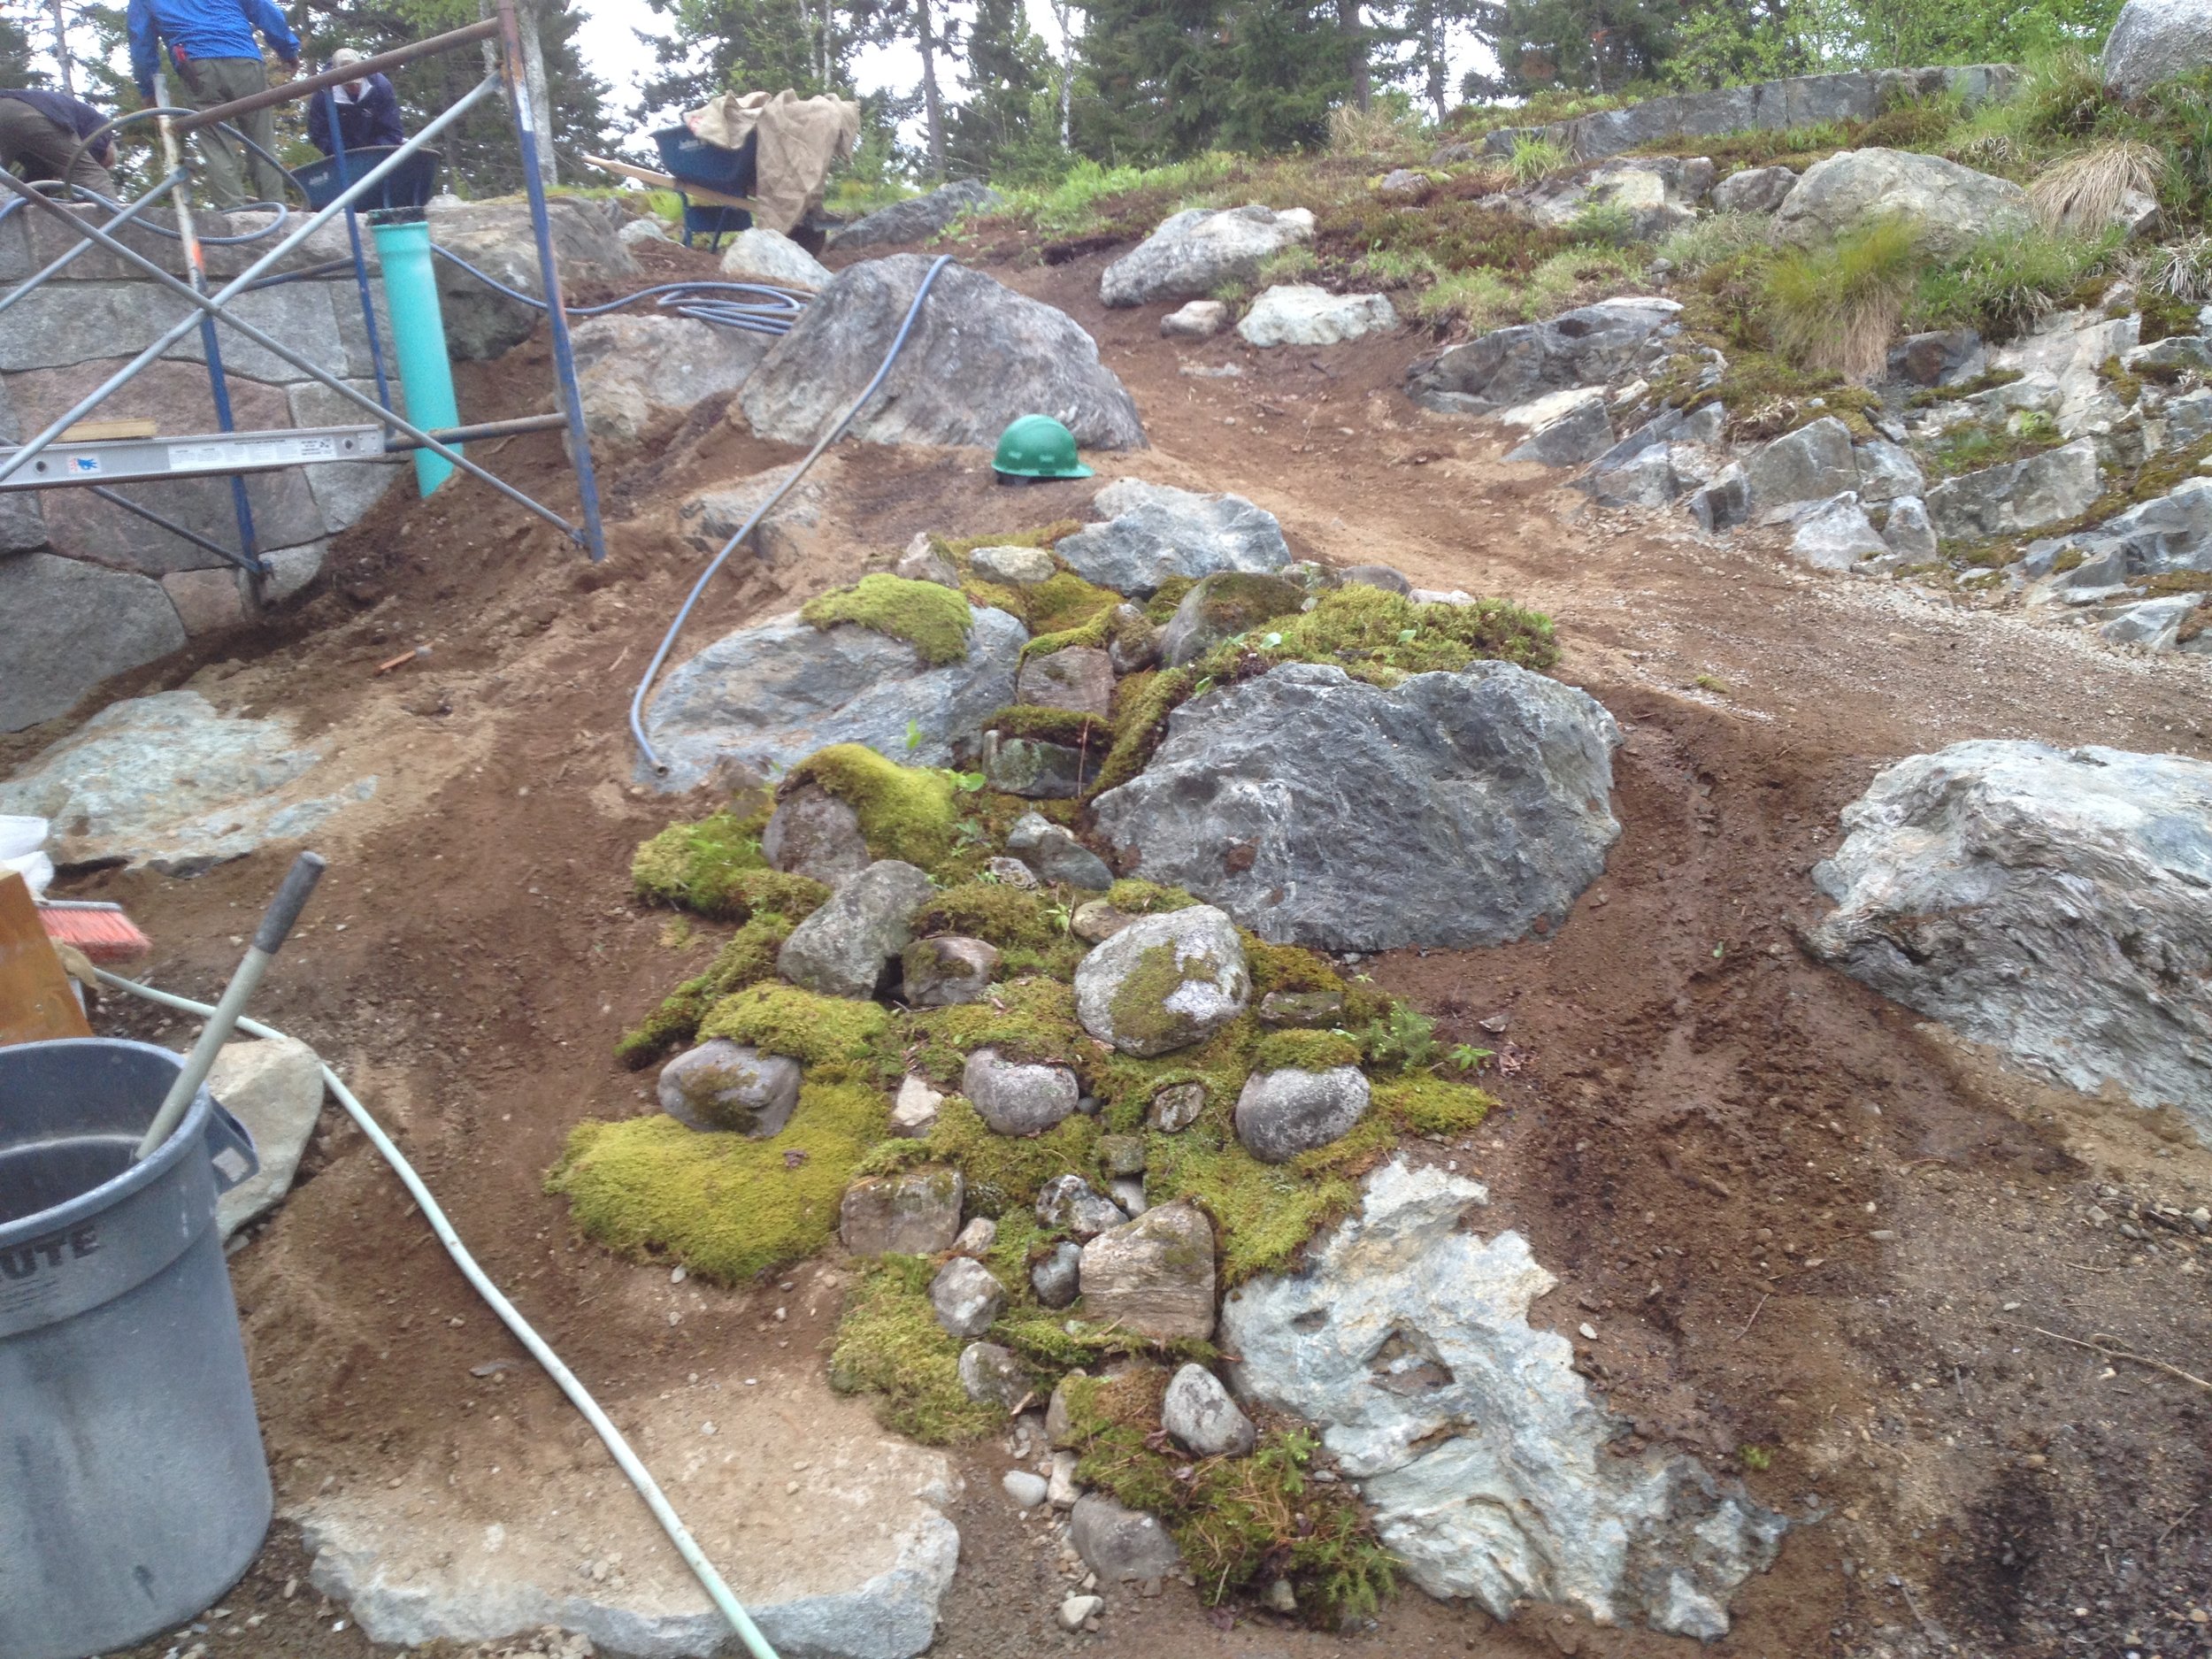   Southwest Harbor ME  - Progress picture of naturalization project. Spill way to deal with rain ruin off. Stone and moss locally sourced.  